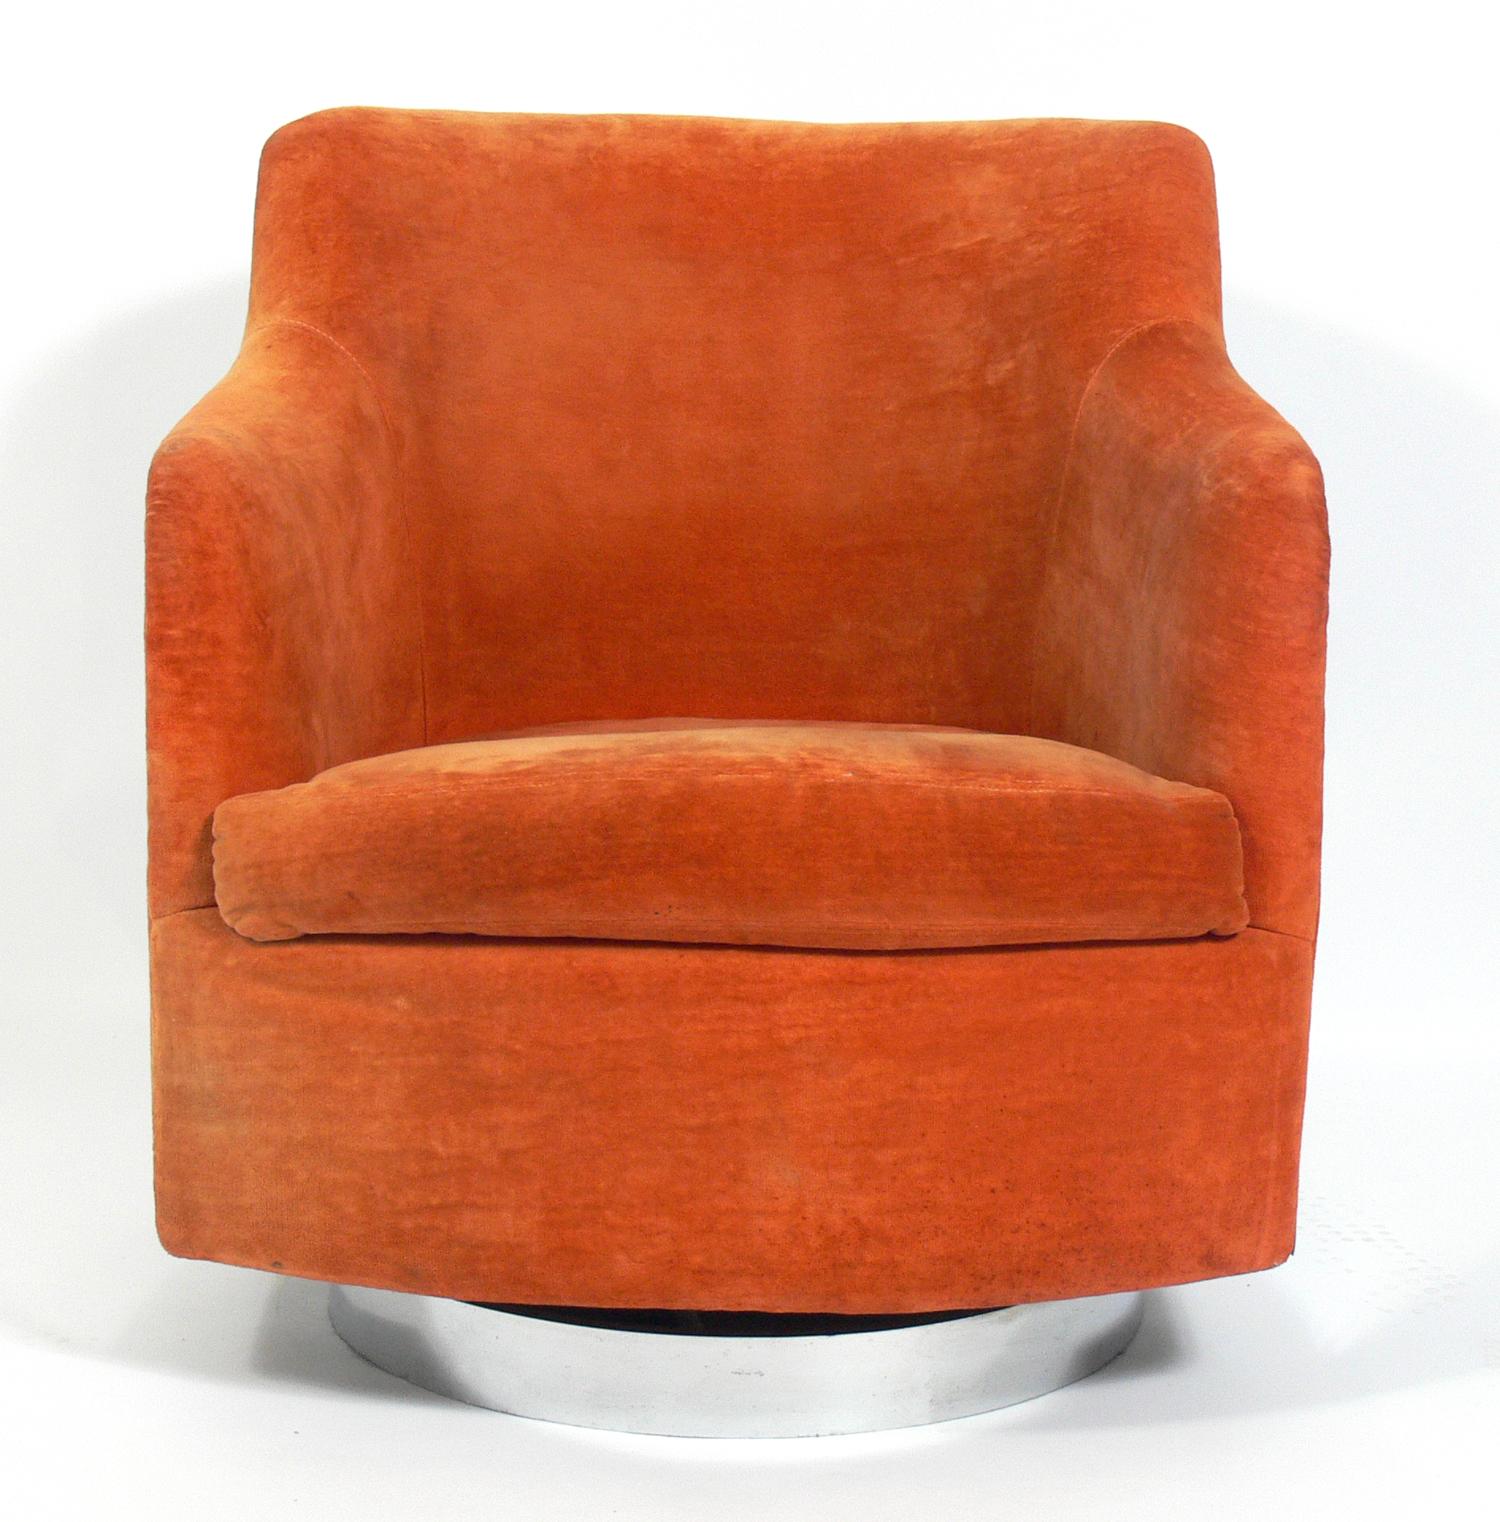 Curvaceous chrome swivel chair, designed by Milo Baughman, American, circa 1960s. Chrome has been hand polished. Retains original orange velvet style fabric. We can reupholster it for you in your fabric for an additional $400 if you prefer.